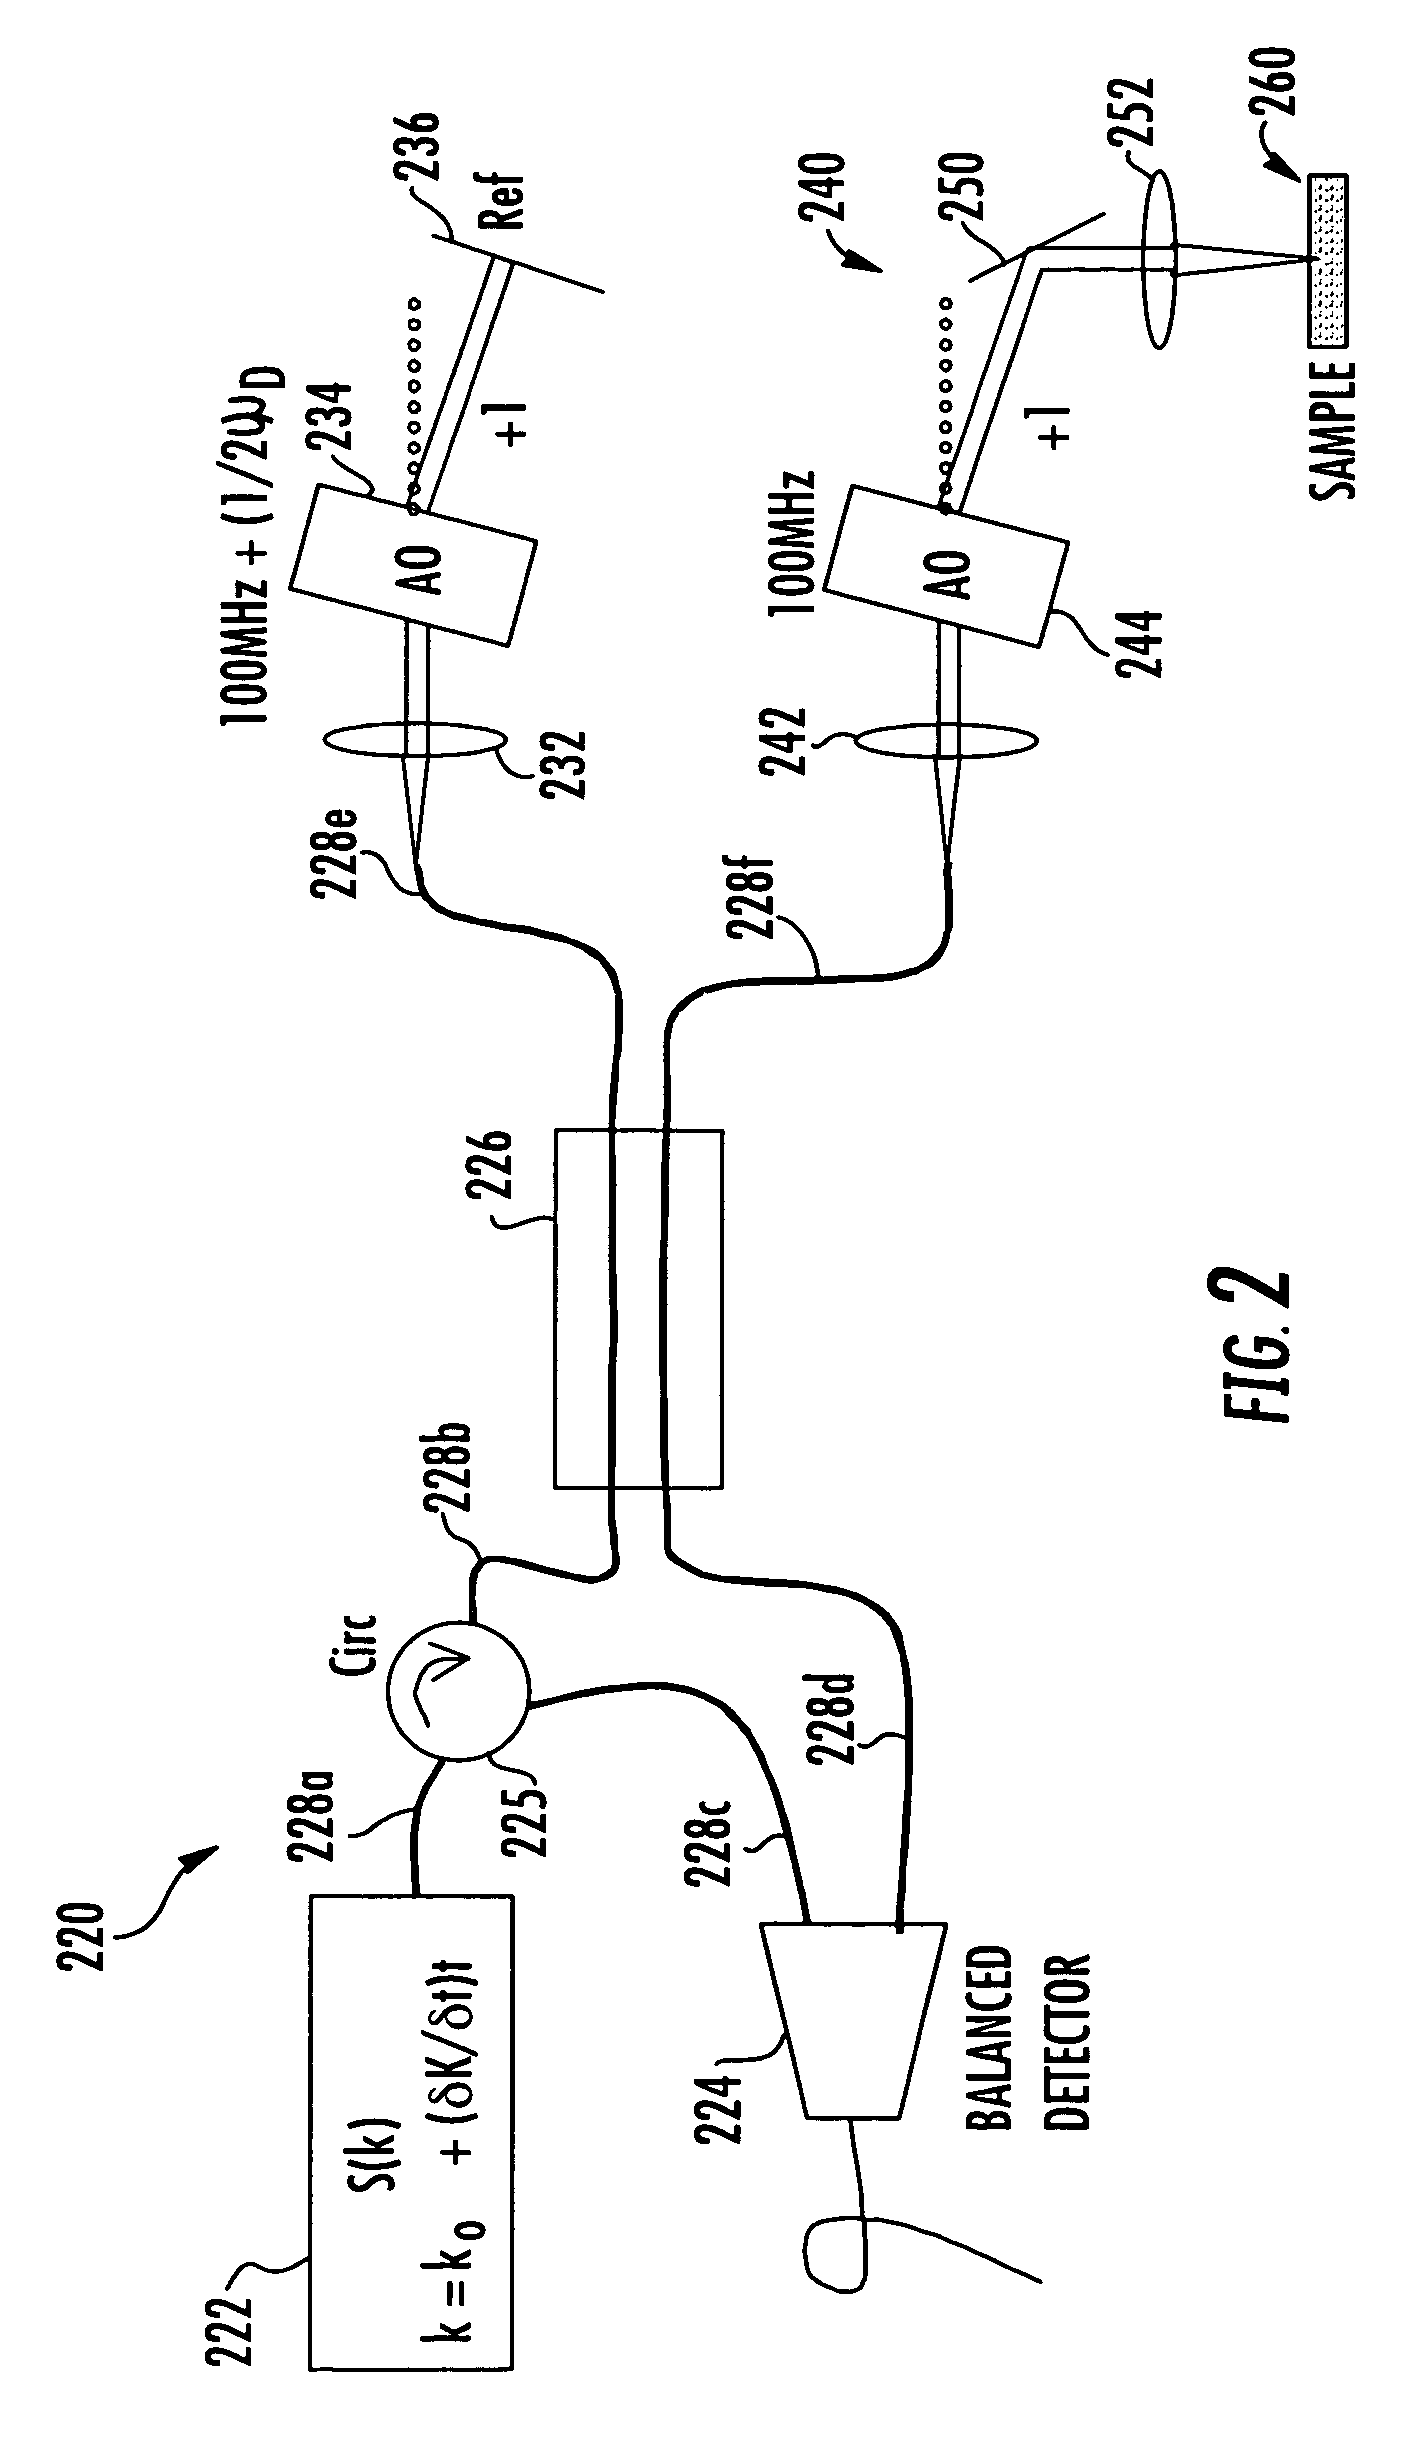 Methods and systems for reducing complex conjugate ambiguity in interferometric data